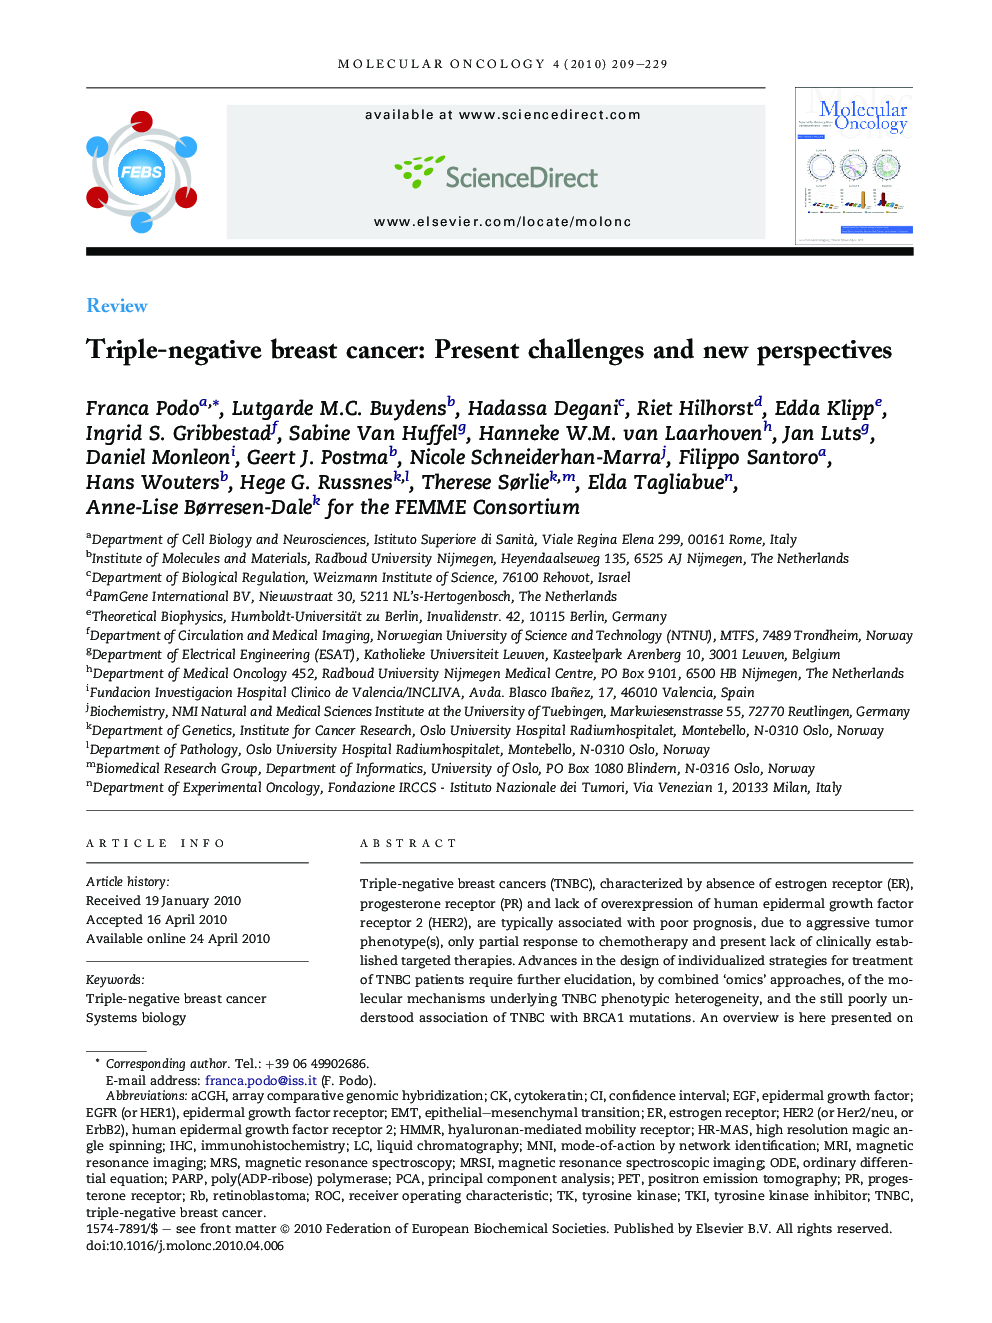 Triple-negative breast cancer: Present challenges and new perspectives